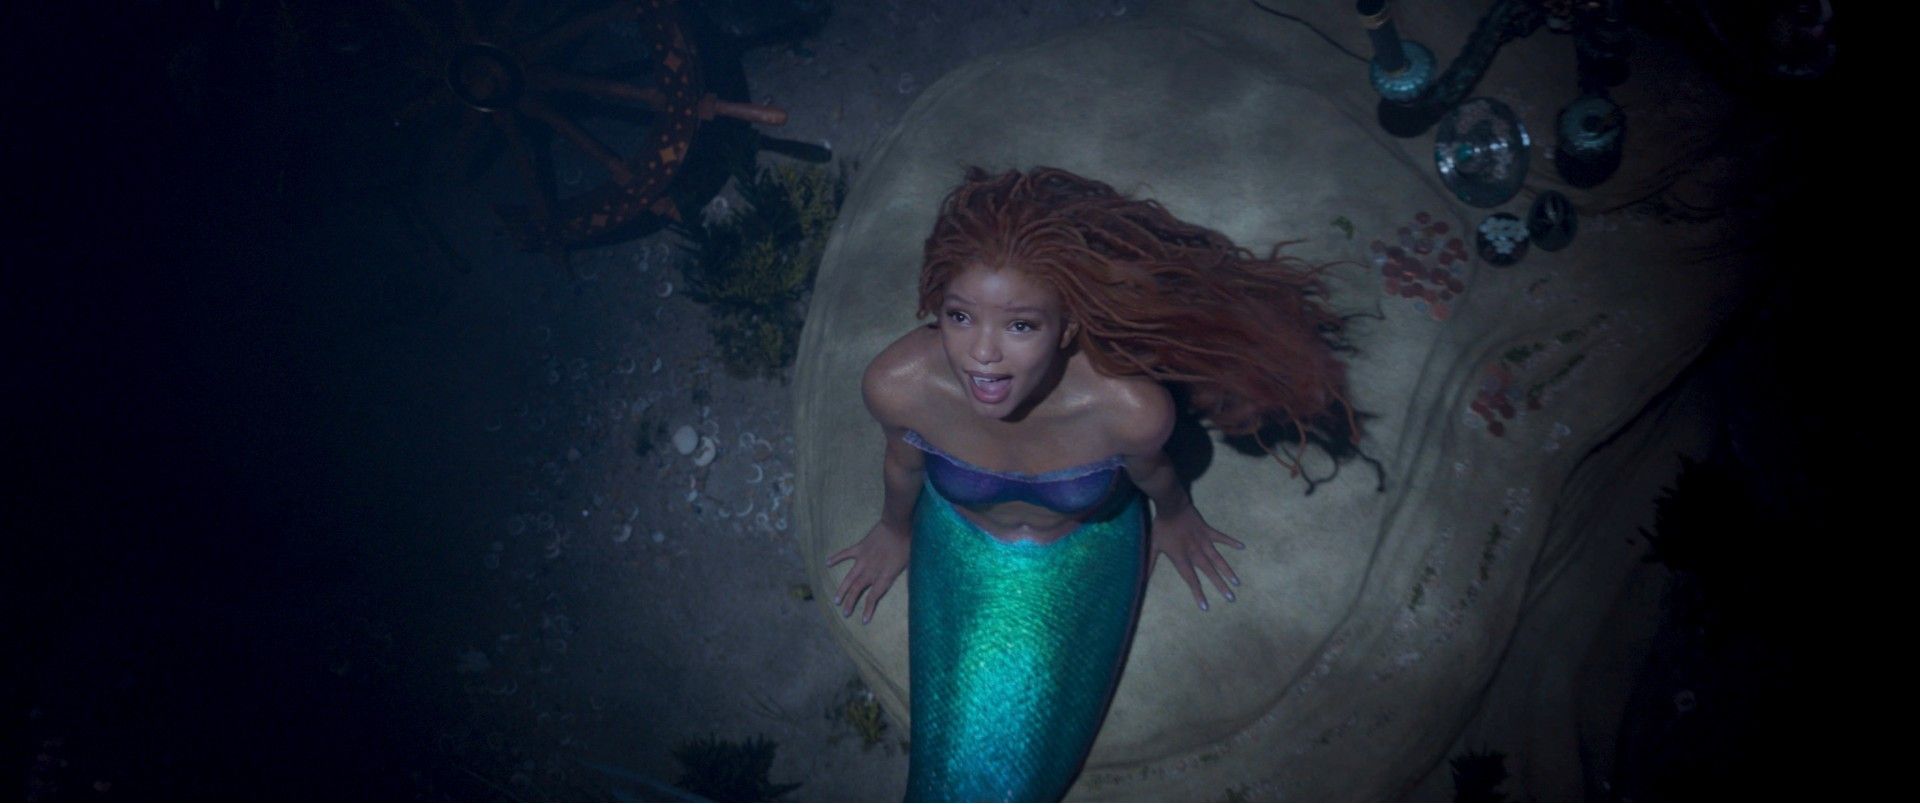 The Little Mermaid cast, trailer and more